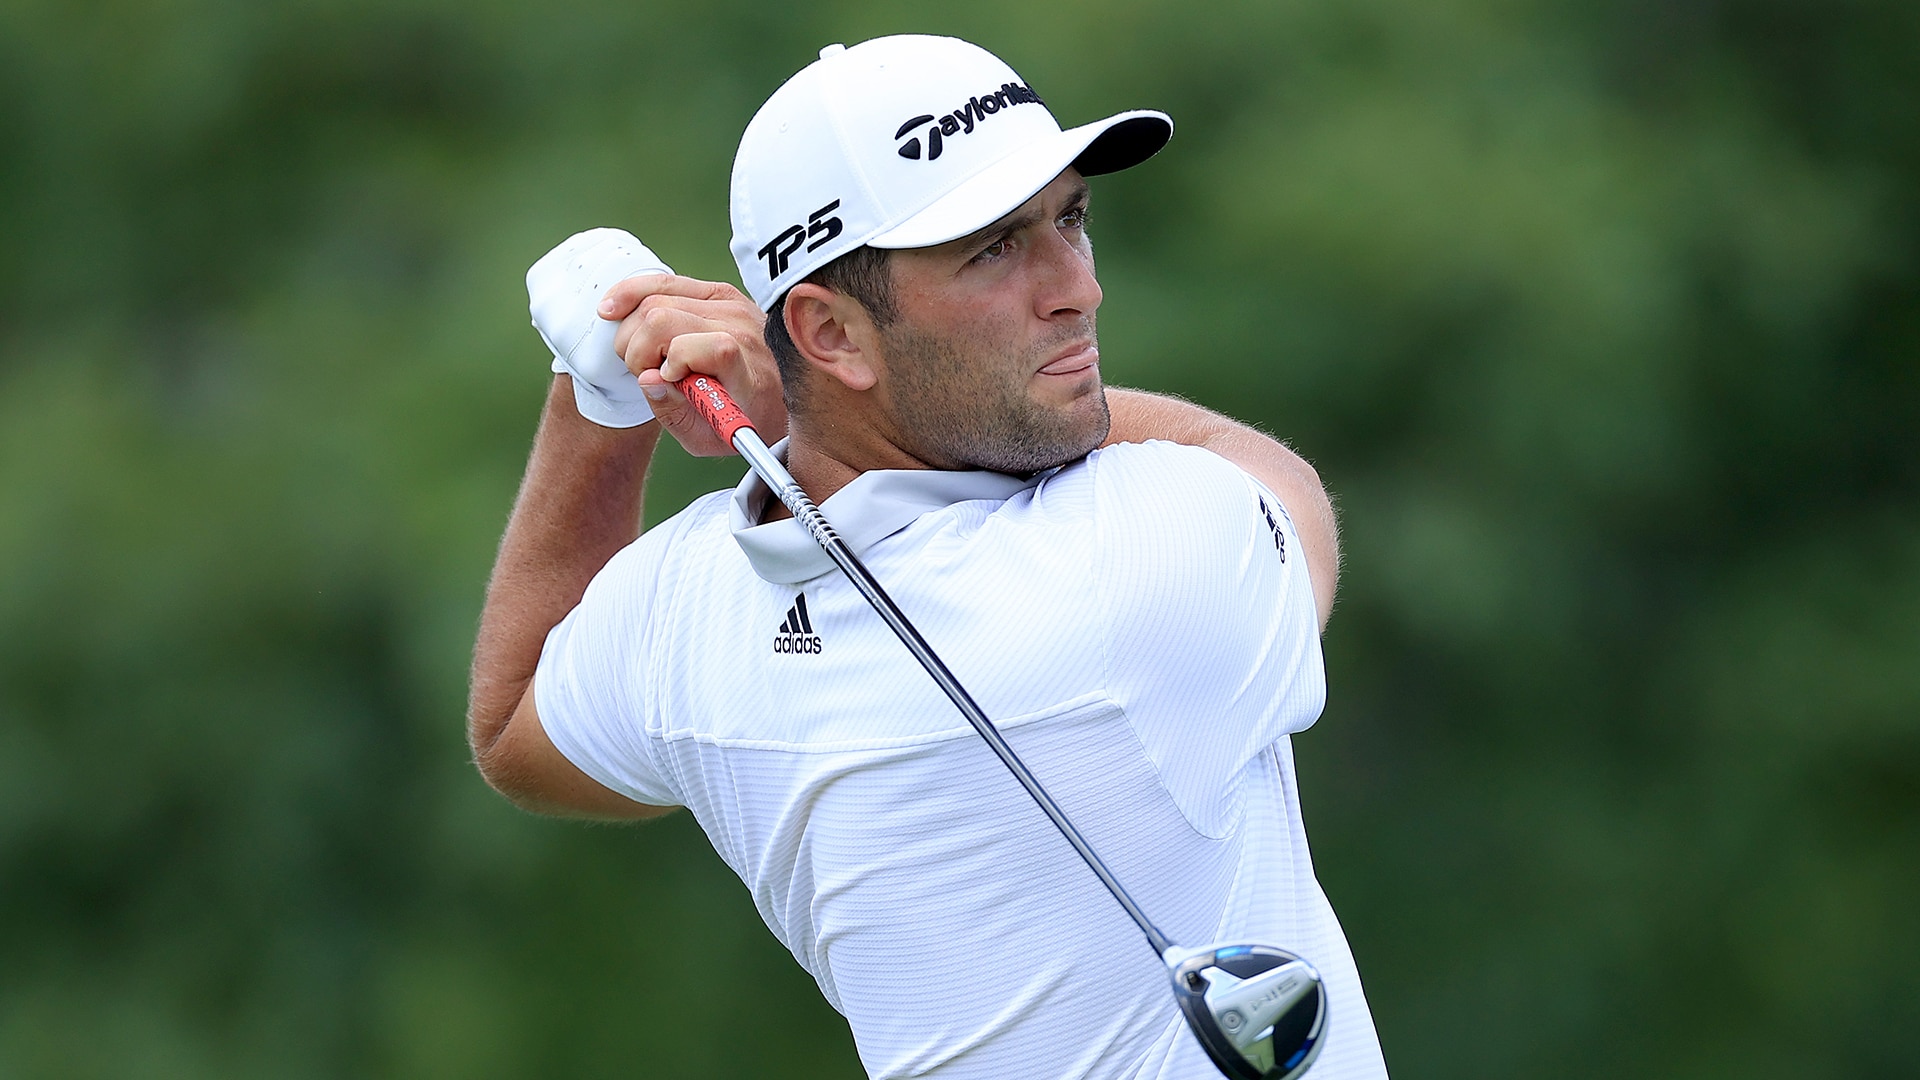 For Jon Rahm, getting to No. 1 is special, but he wants to stay there